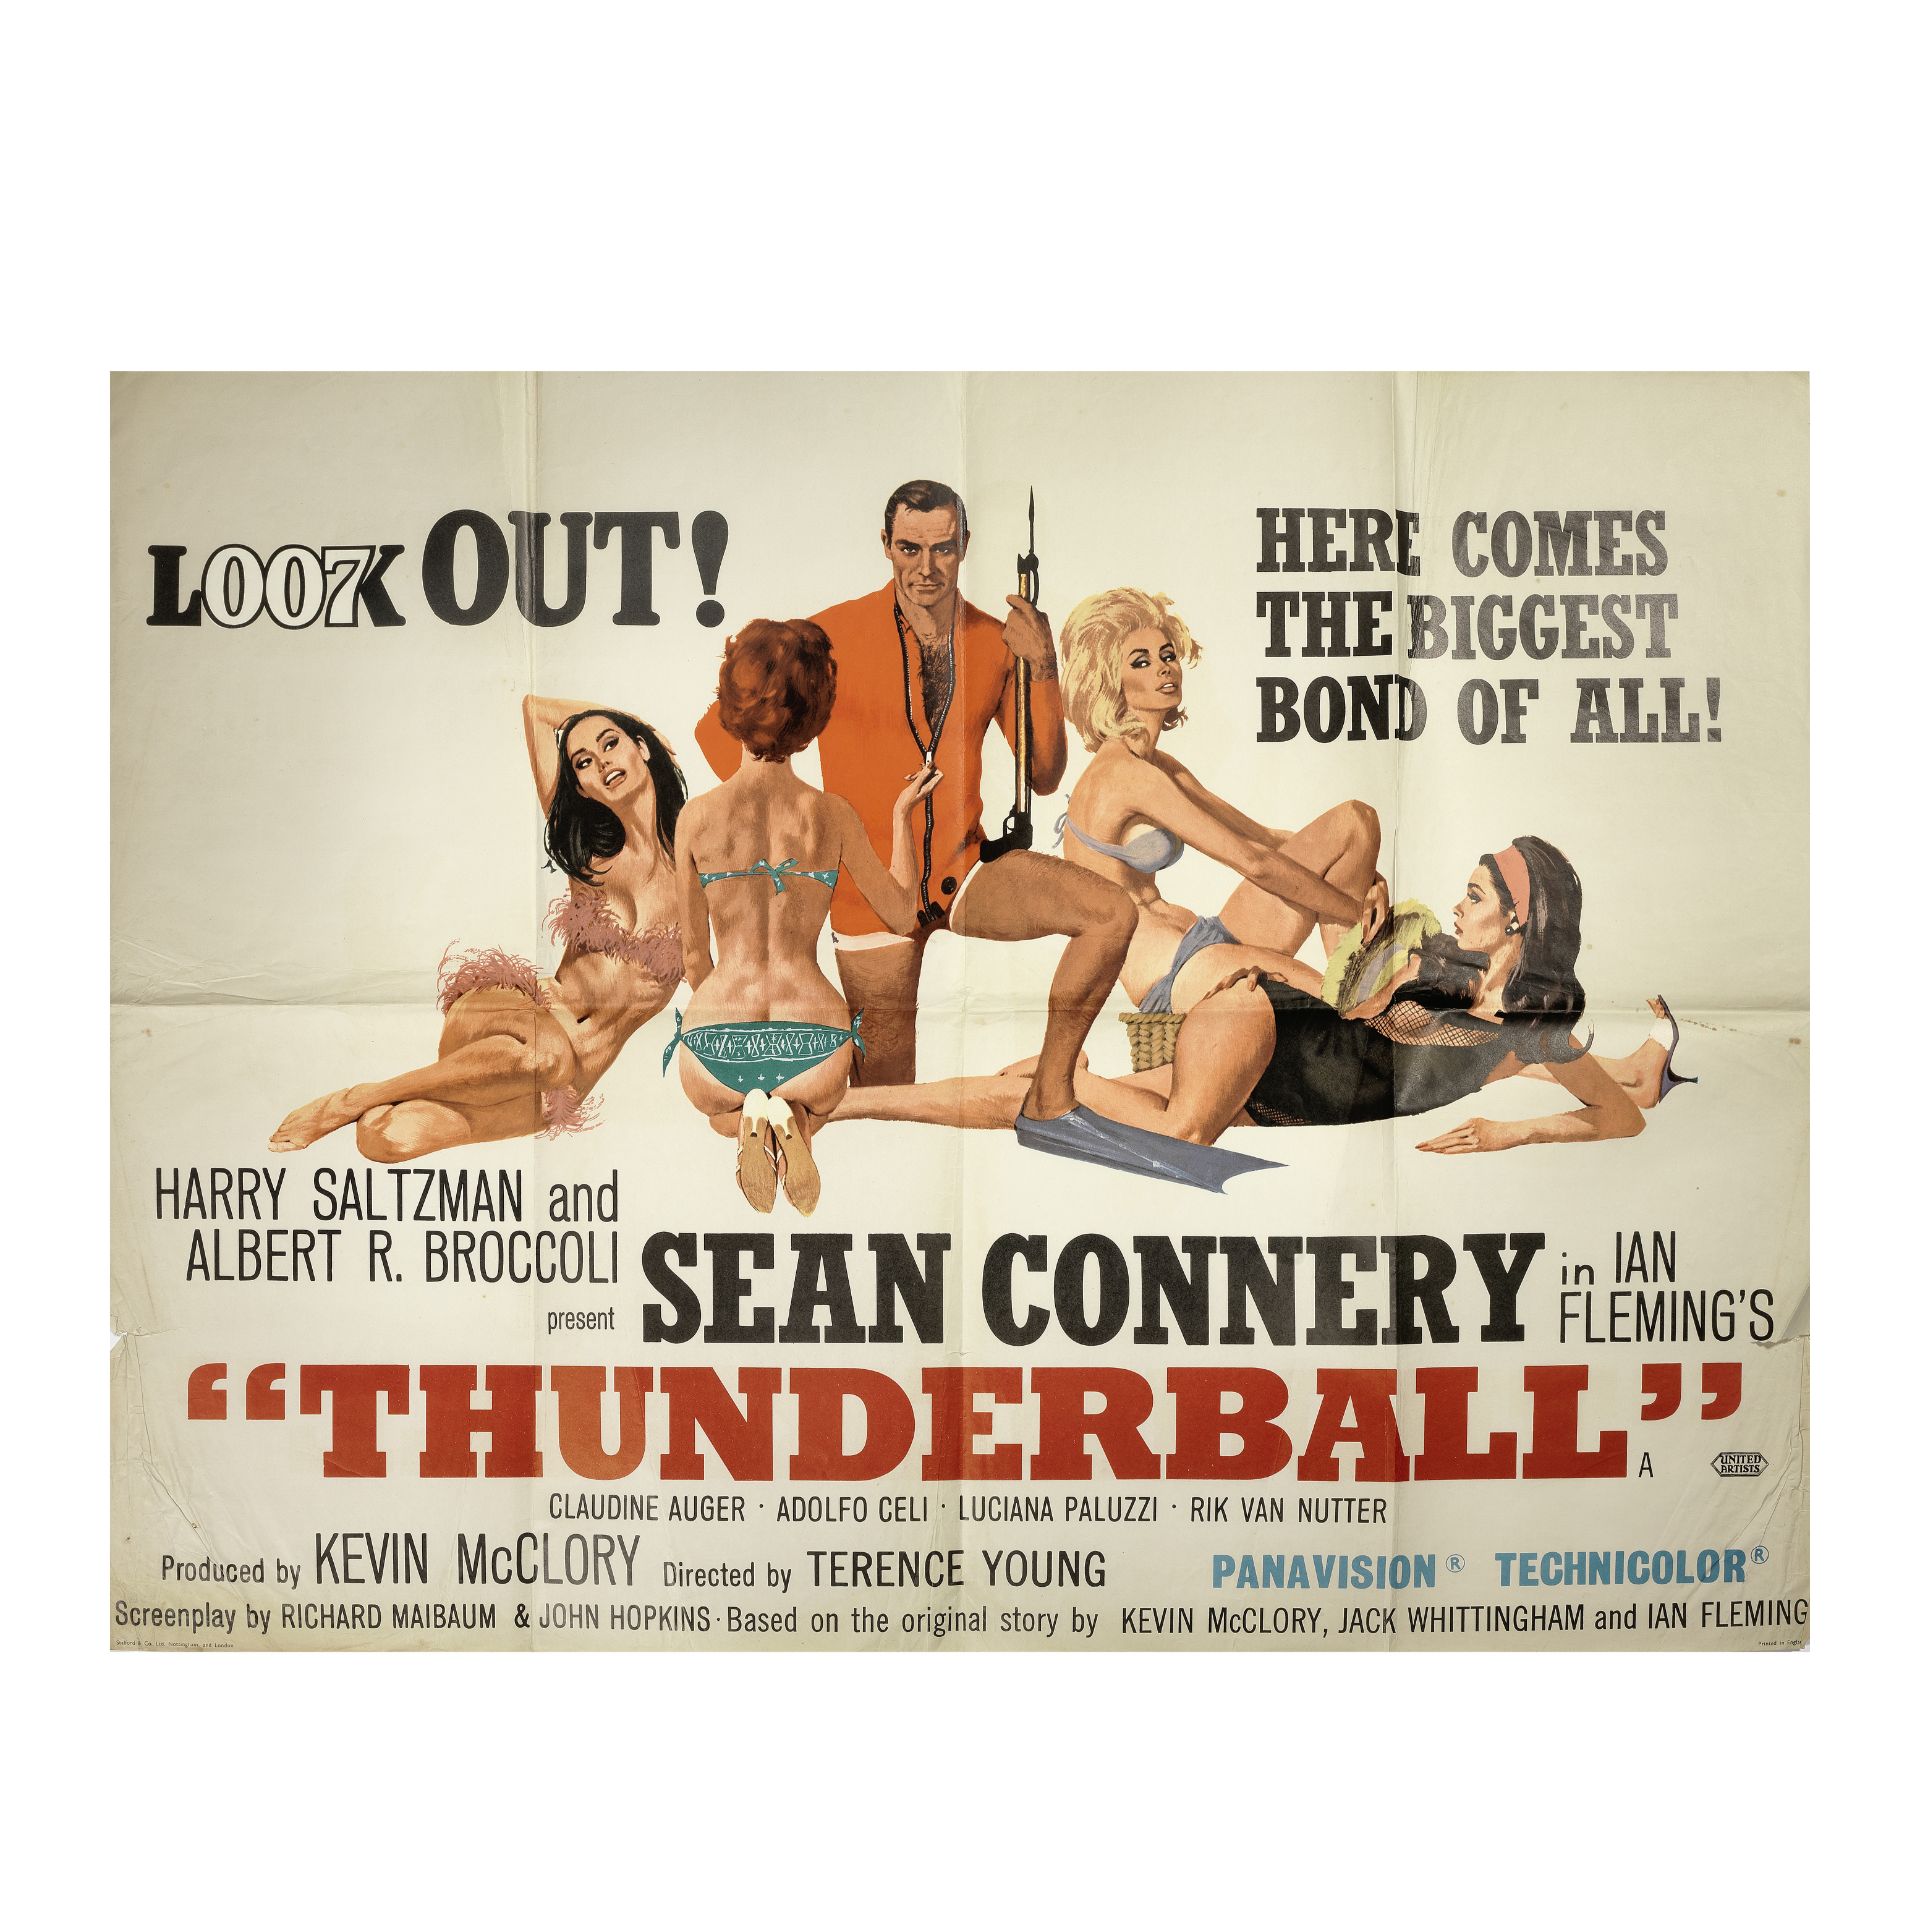 Thunderball, Eon Productions/United Artists, 1965,